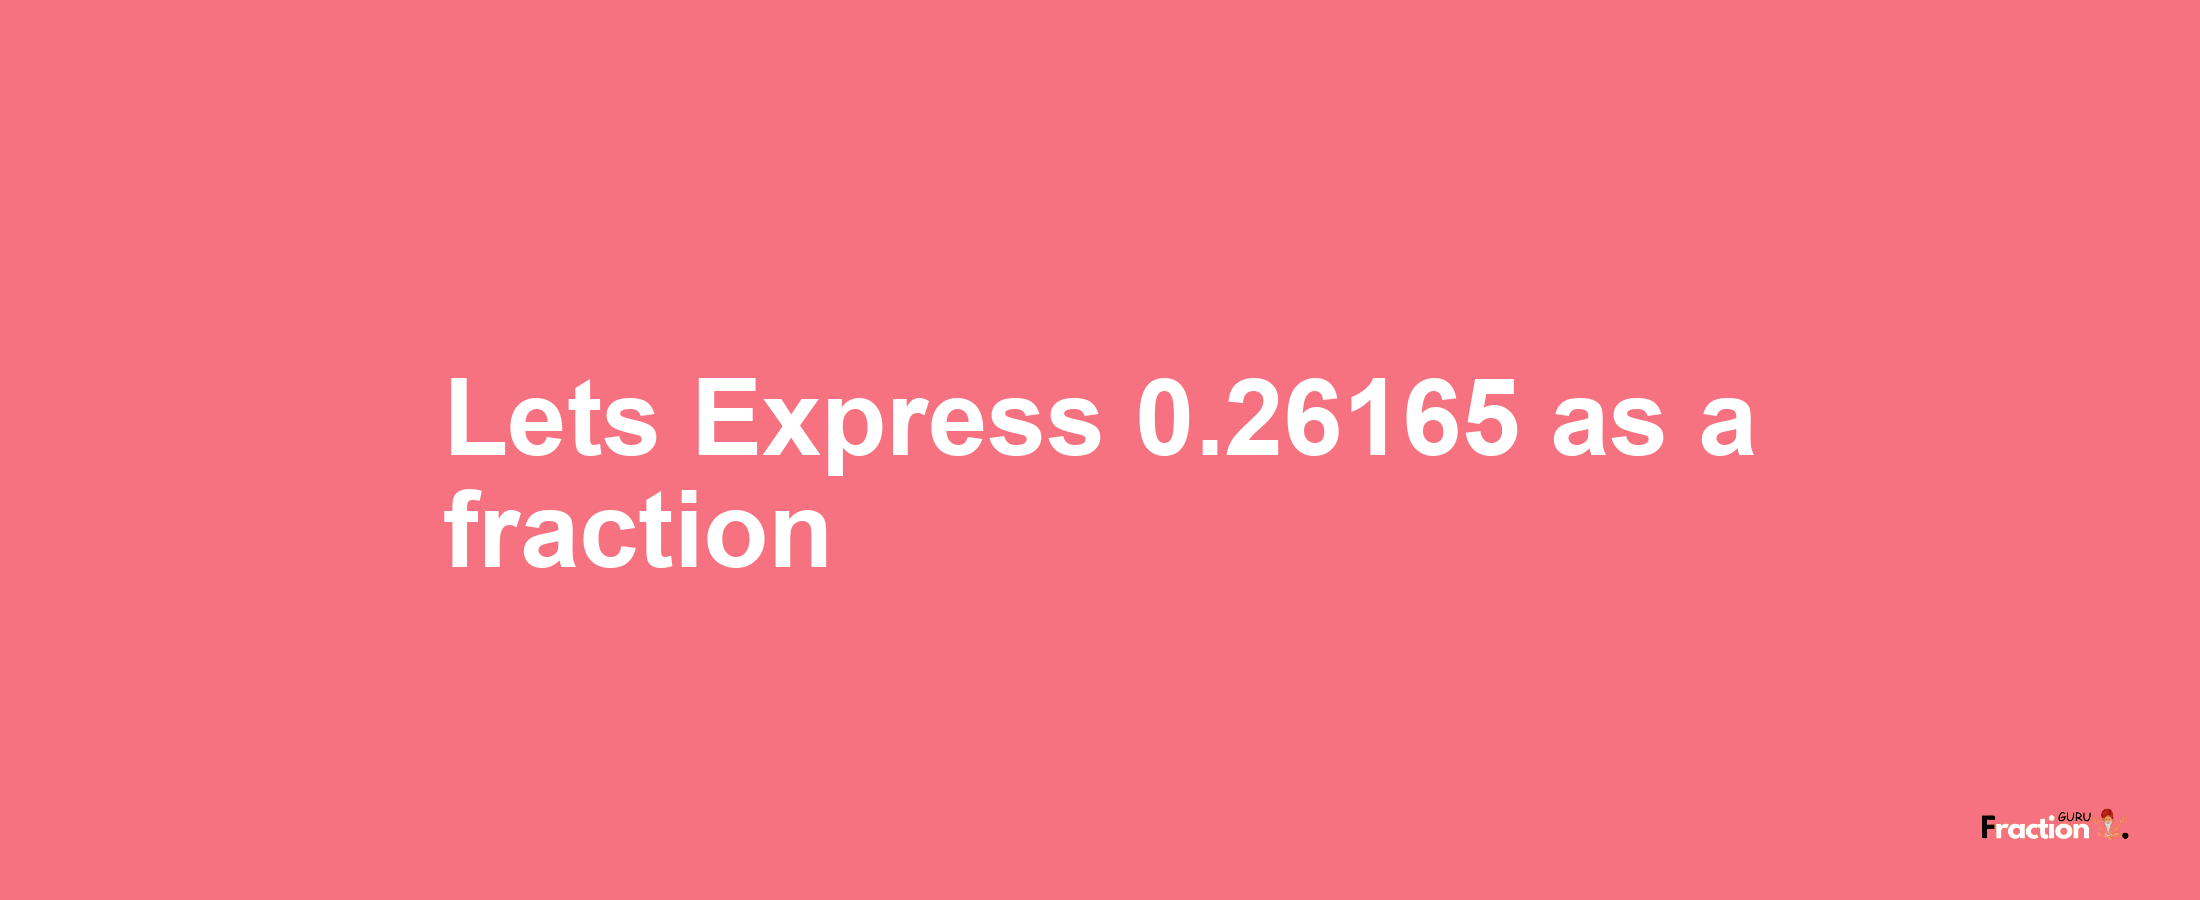 Lets Express 0.26165 as afraction